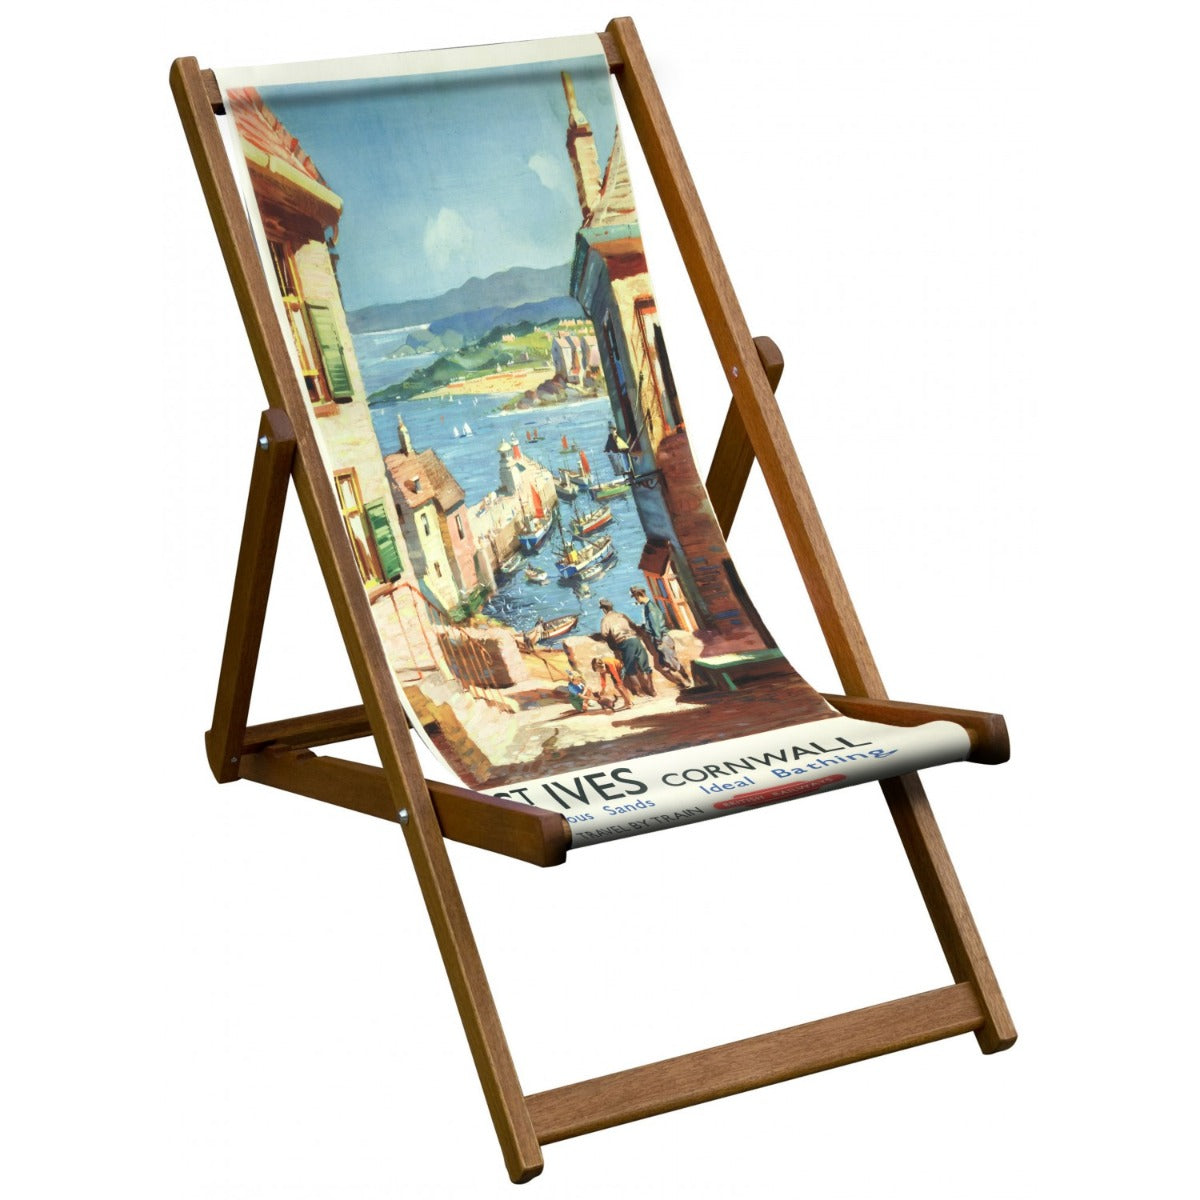 Vintage Inspired Wooden Deckchair- St.Ives Cornwall- National Railway Museum Poster